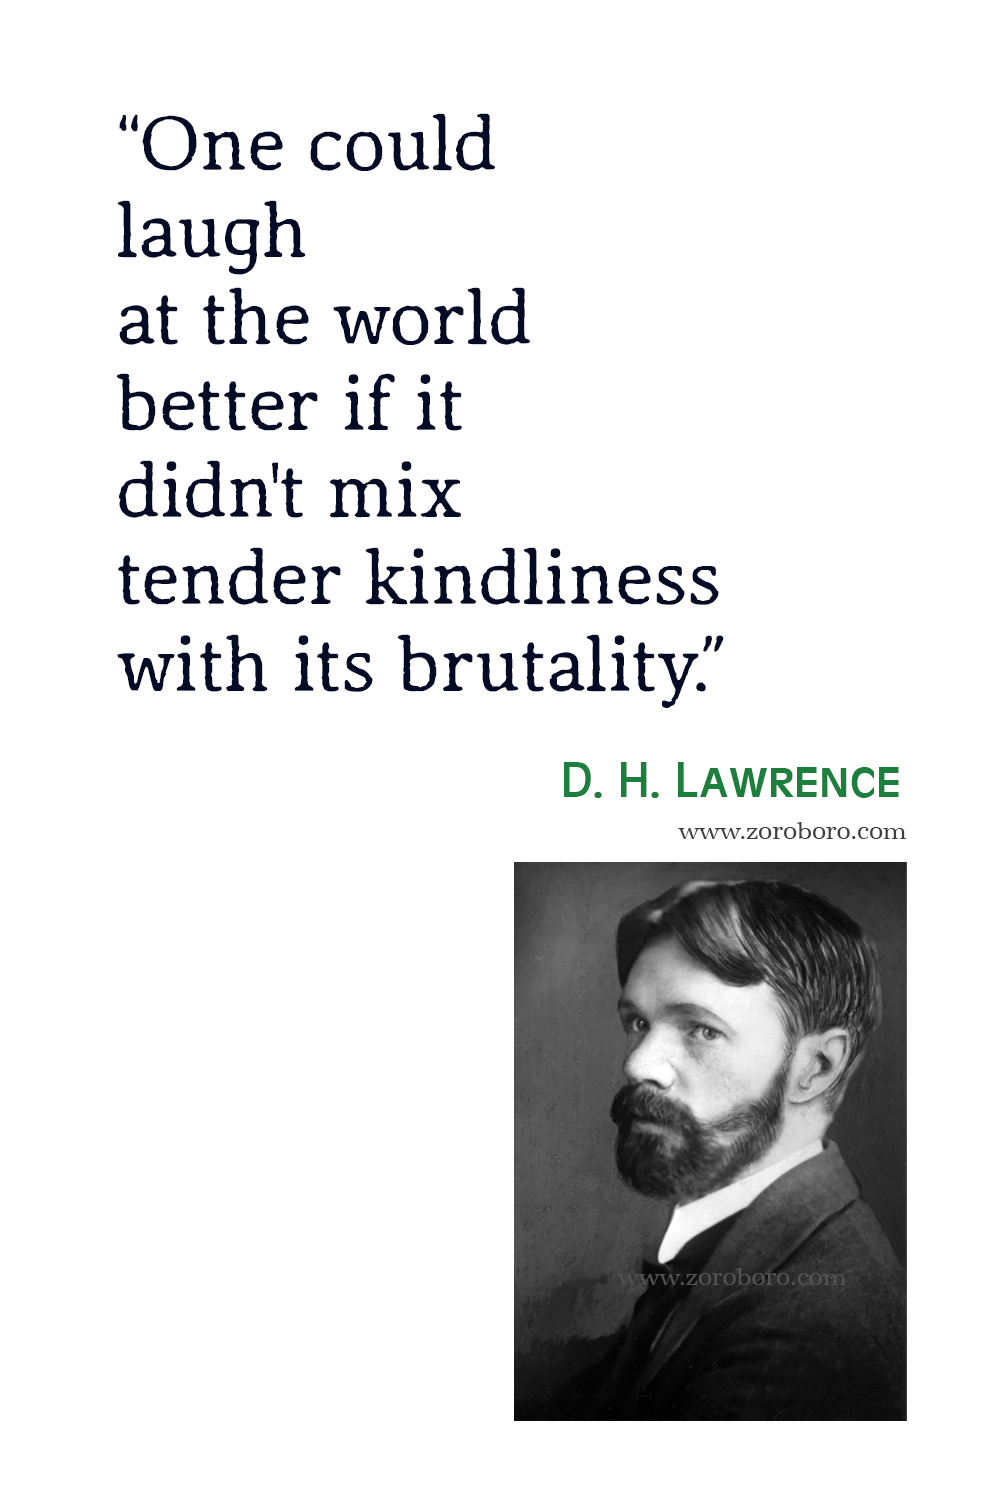 D.H. Lawrence Quotes, D.H. Lawrence Lady Chatterley's Lover Quotes, D.H. Lawrence Poems, D.H. Lawrence Poetry, D.H. Lawrence Philosophy, D.H. Lawrence Books.